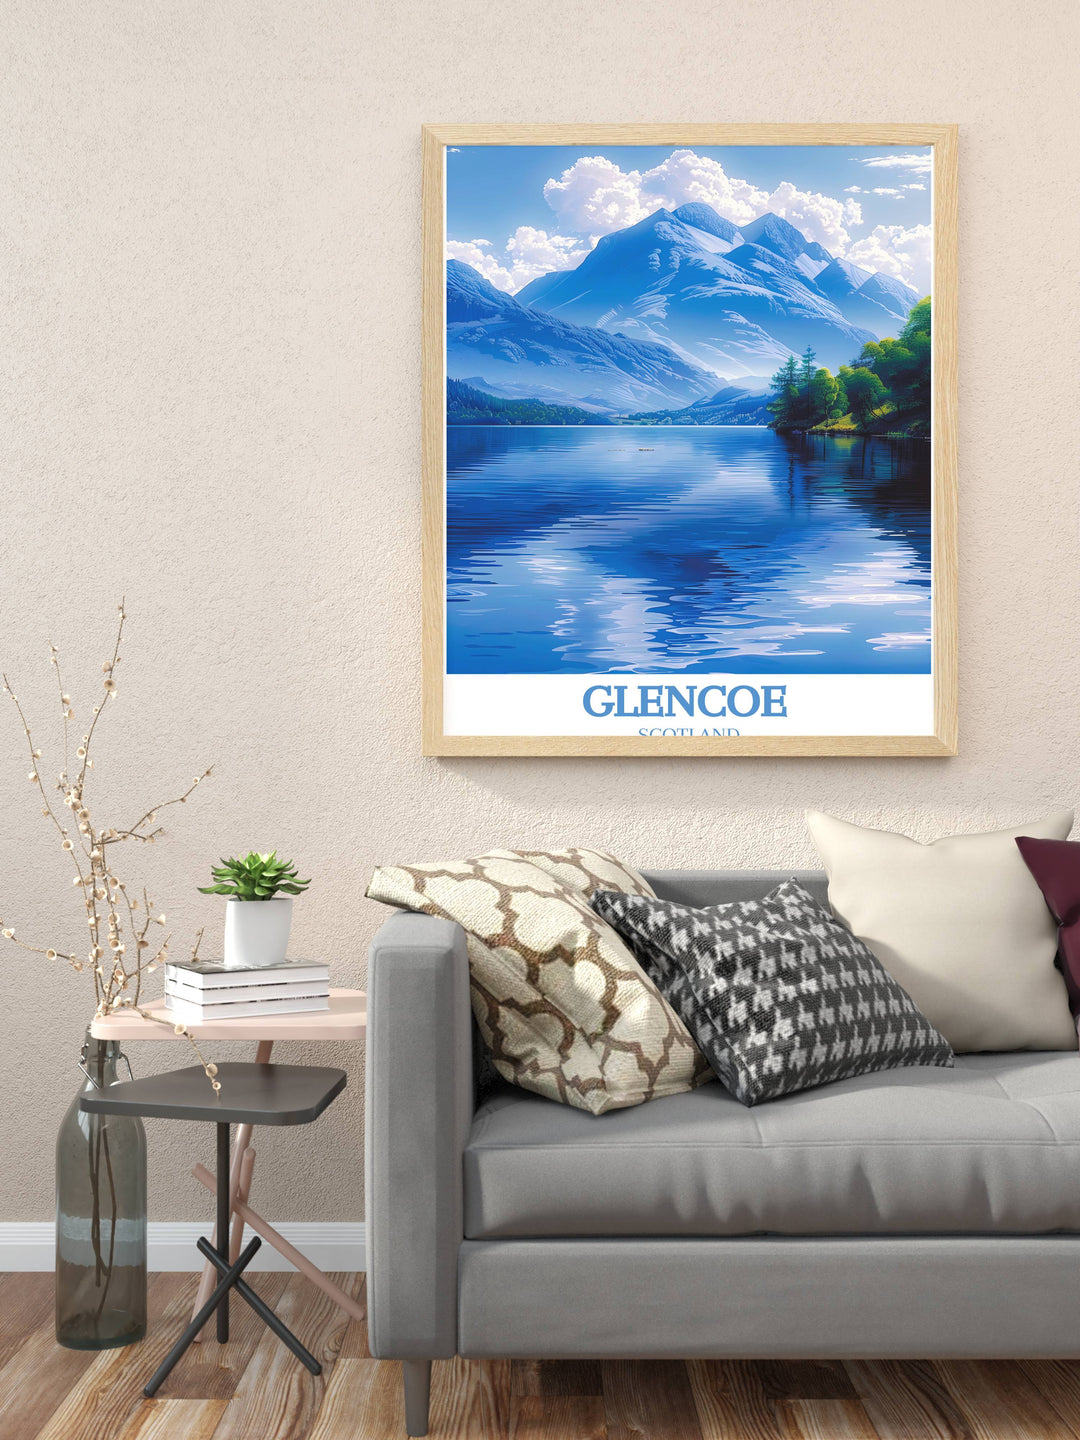 Our Lovers Scotland Art captures the romantic essence of Glencoe, making it a prized addition to any collection of Europe travel posters and gifts.